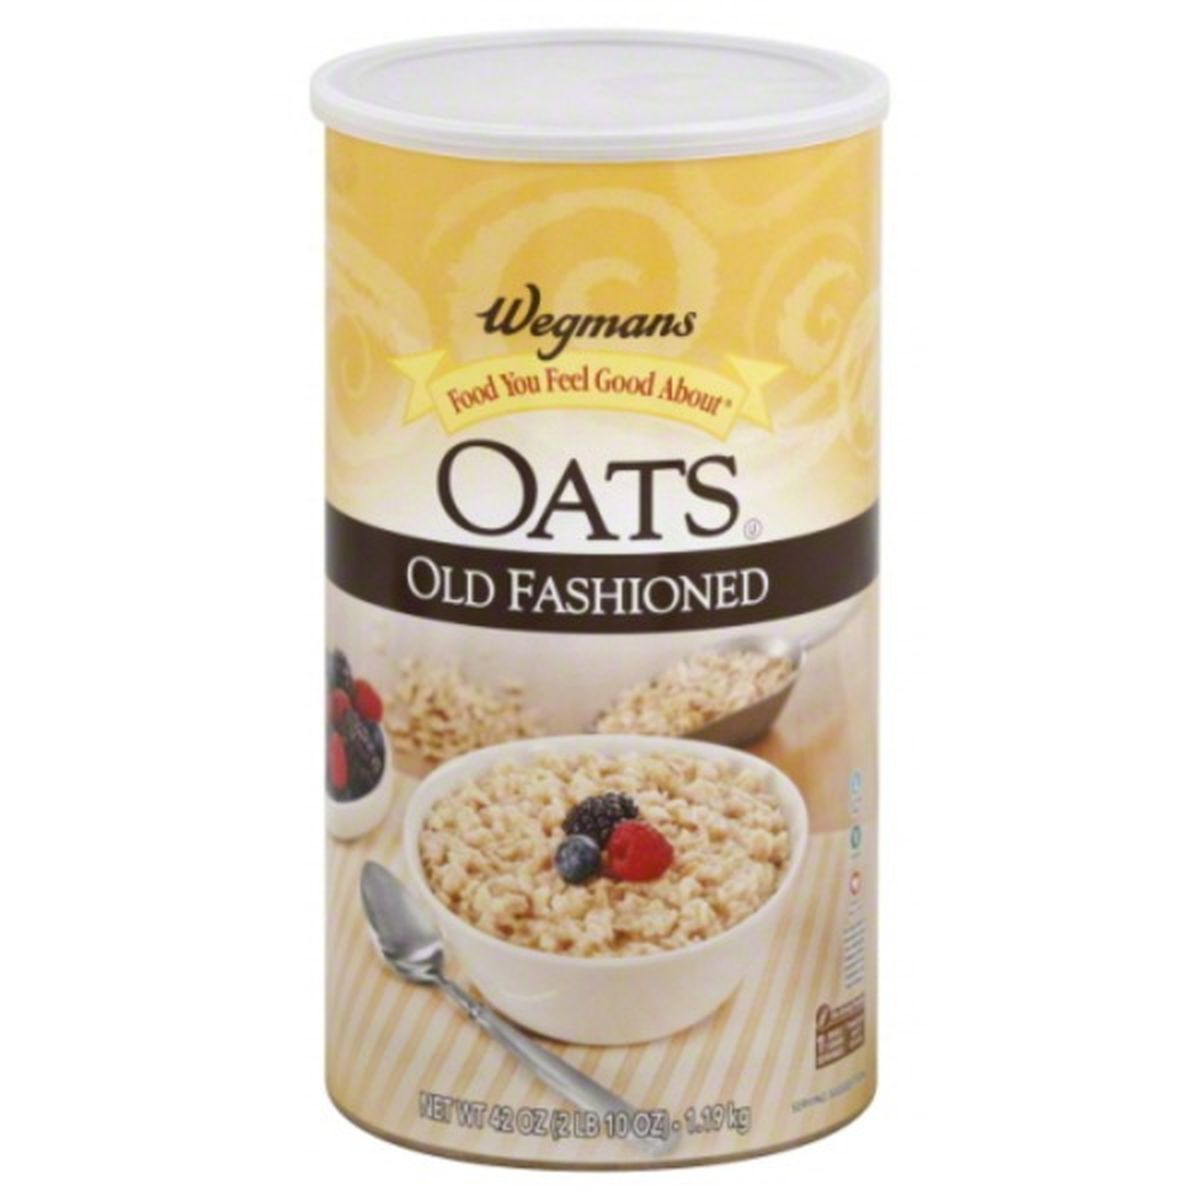 Calories in Wegmans Oats, Old Fashioned